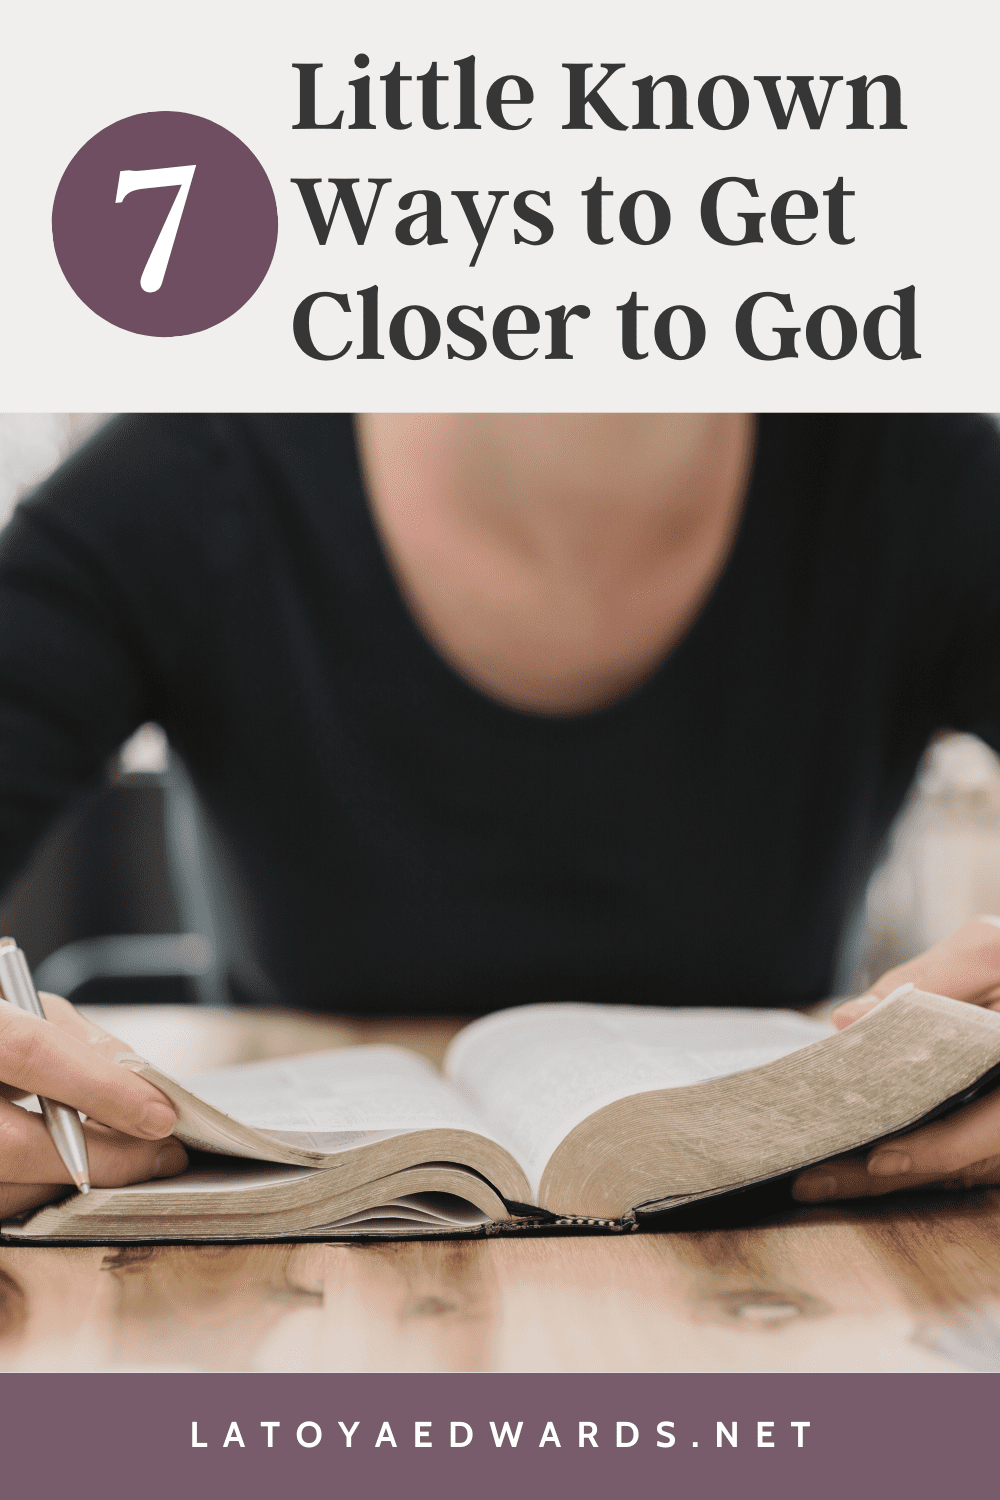 Bible study and prayer aren't the only way to grow closer to God. If you are feeling bored or unmotivated sometimes switching things up during your quiet time with God can make a big difference. If you're looking for new ways to get to know God better I cover this in depth in this podcast episode. Talking to God is a great way to grow your faith and I'm sharing some creative ways to do that. I also cover different ways to engaged with scripture. Visit the full blog post to read more.